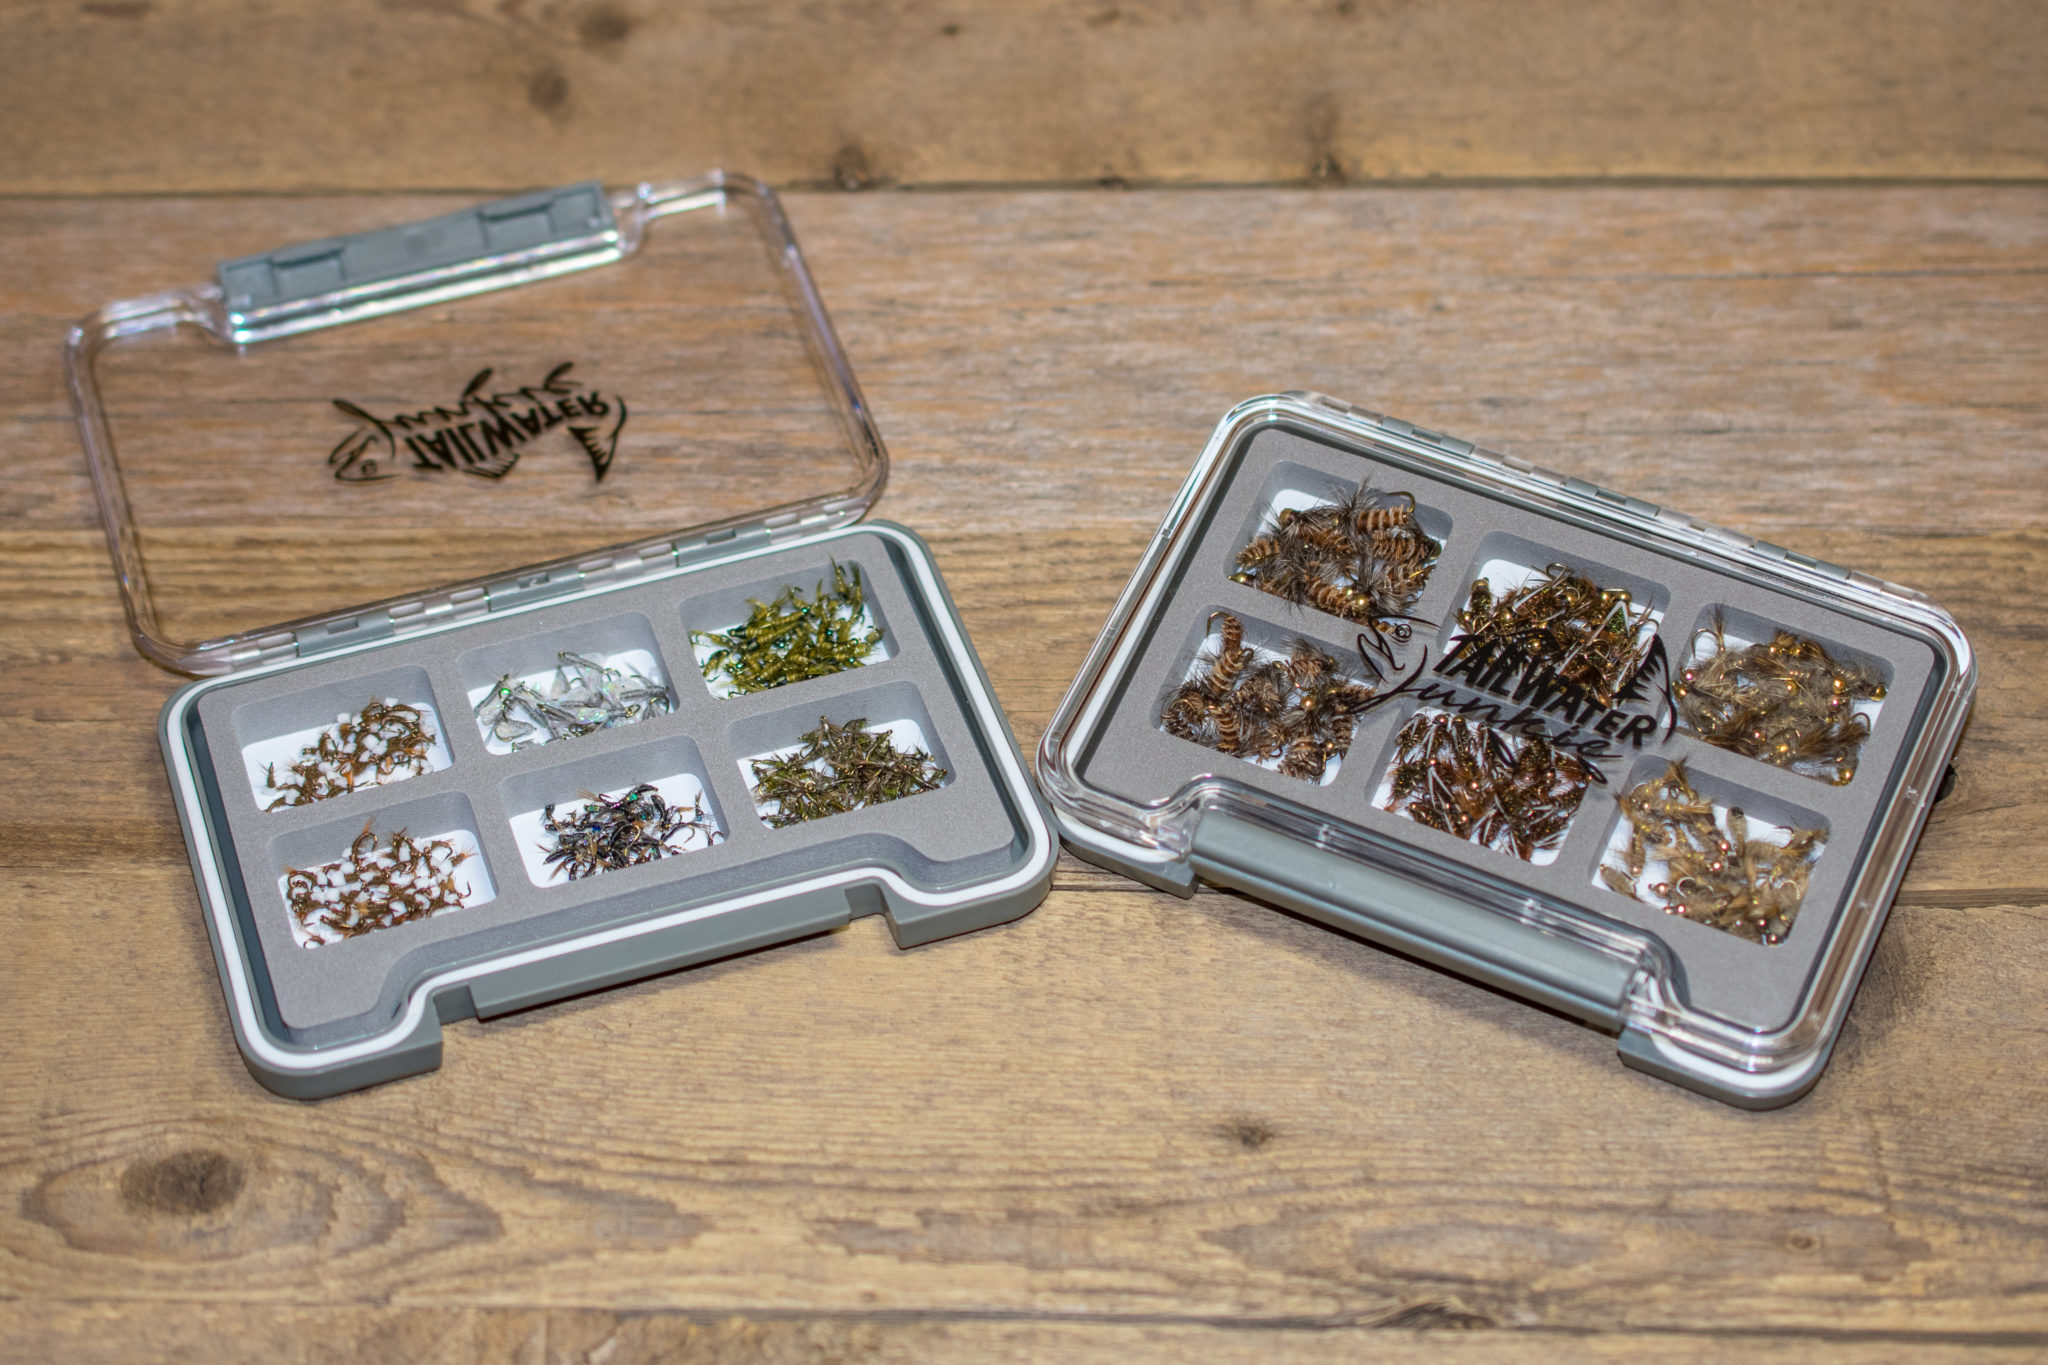 GREEN HALF PRICE BARGAIN FLY BOX MADE IN ENGLAND 